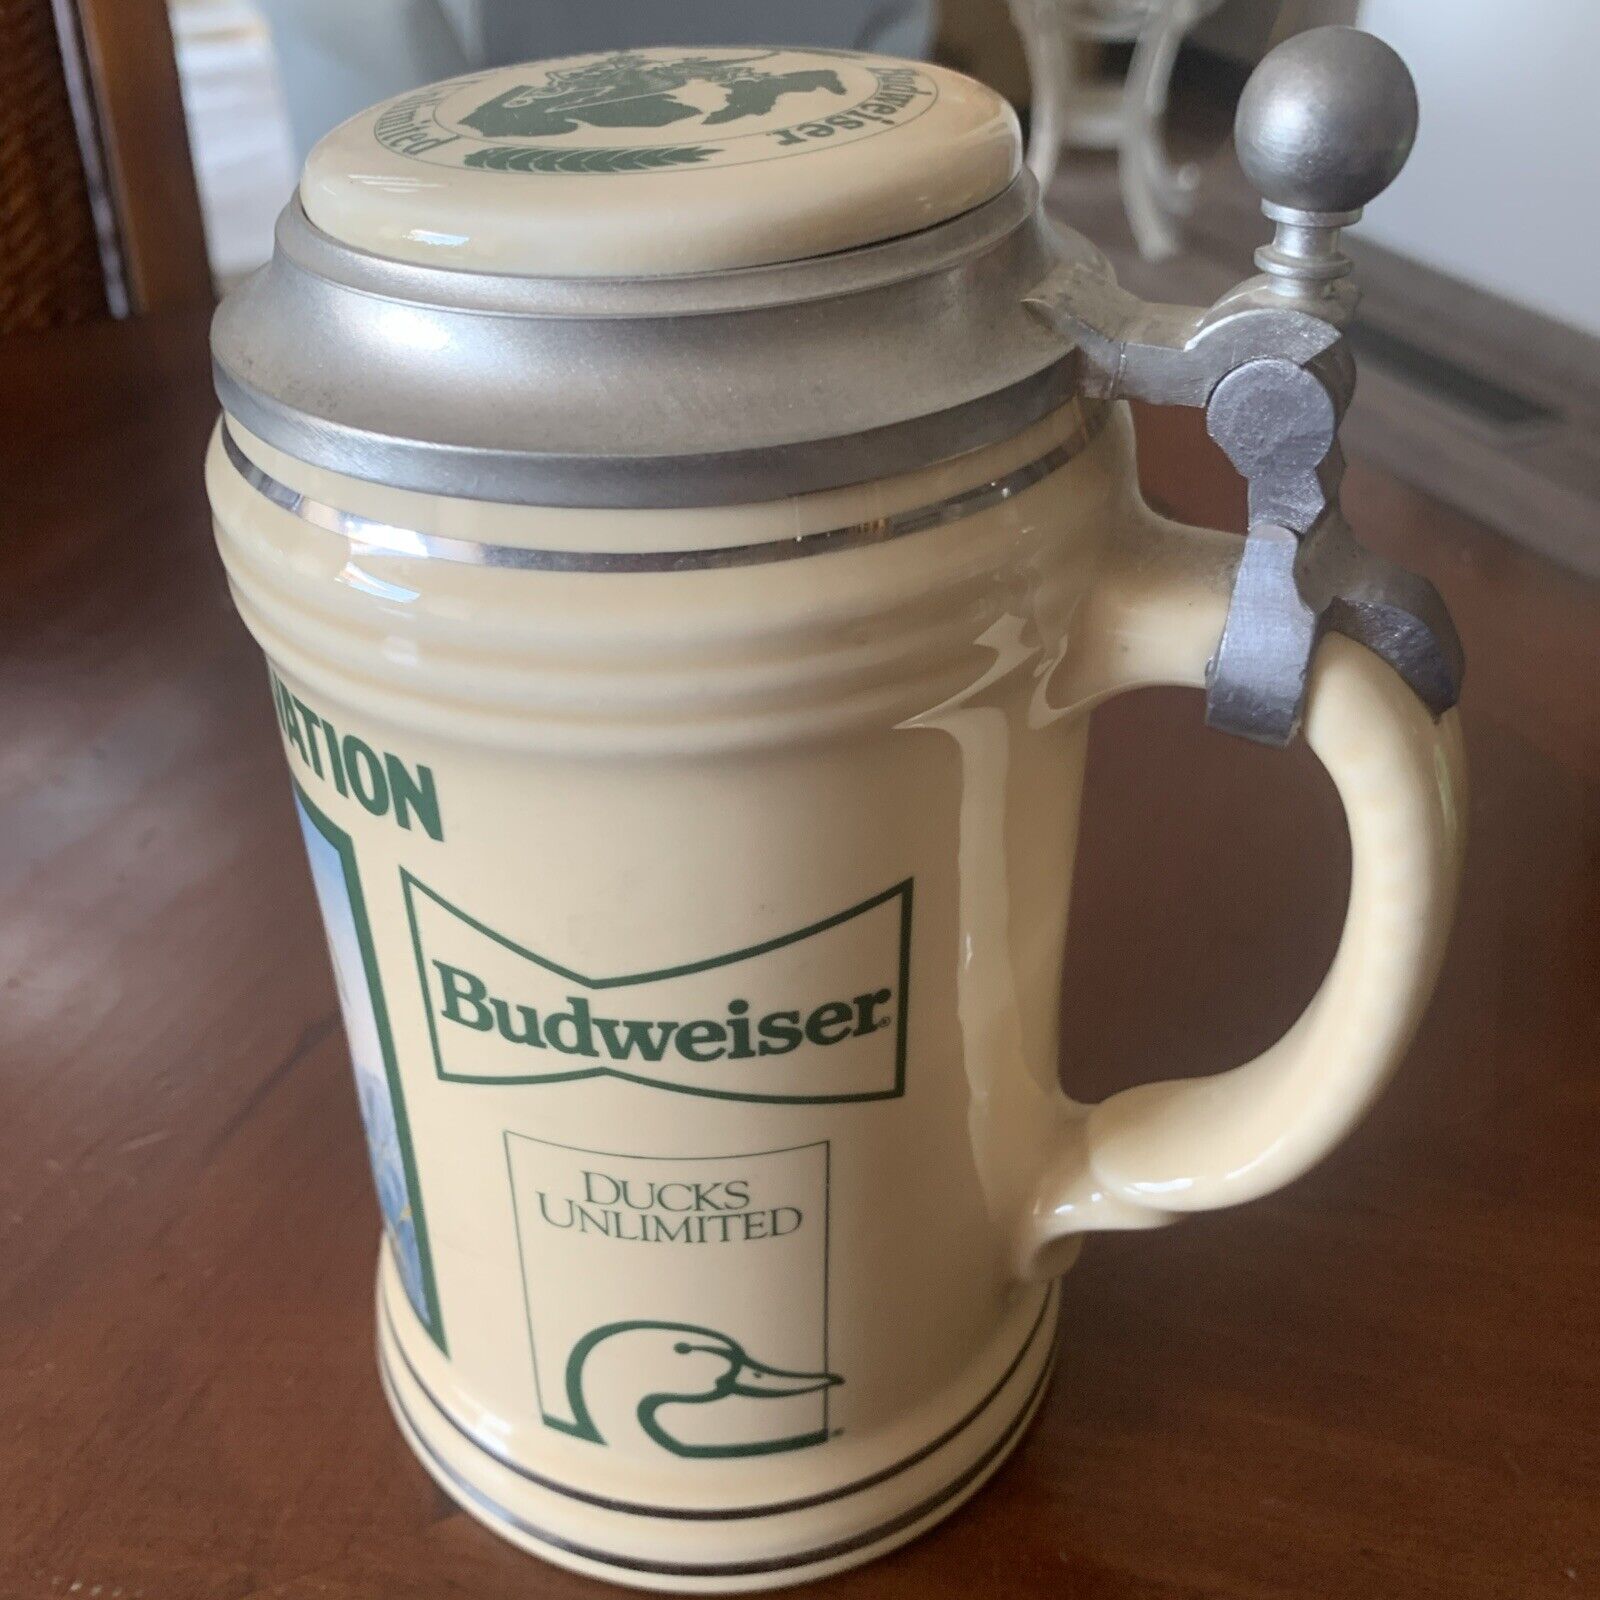 Ducks Unlimited Budweiser Partners In Conservation Beer Stein 1992 First Series